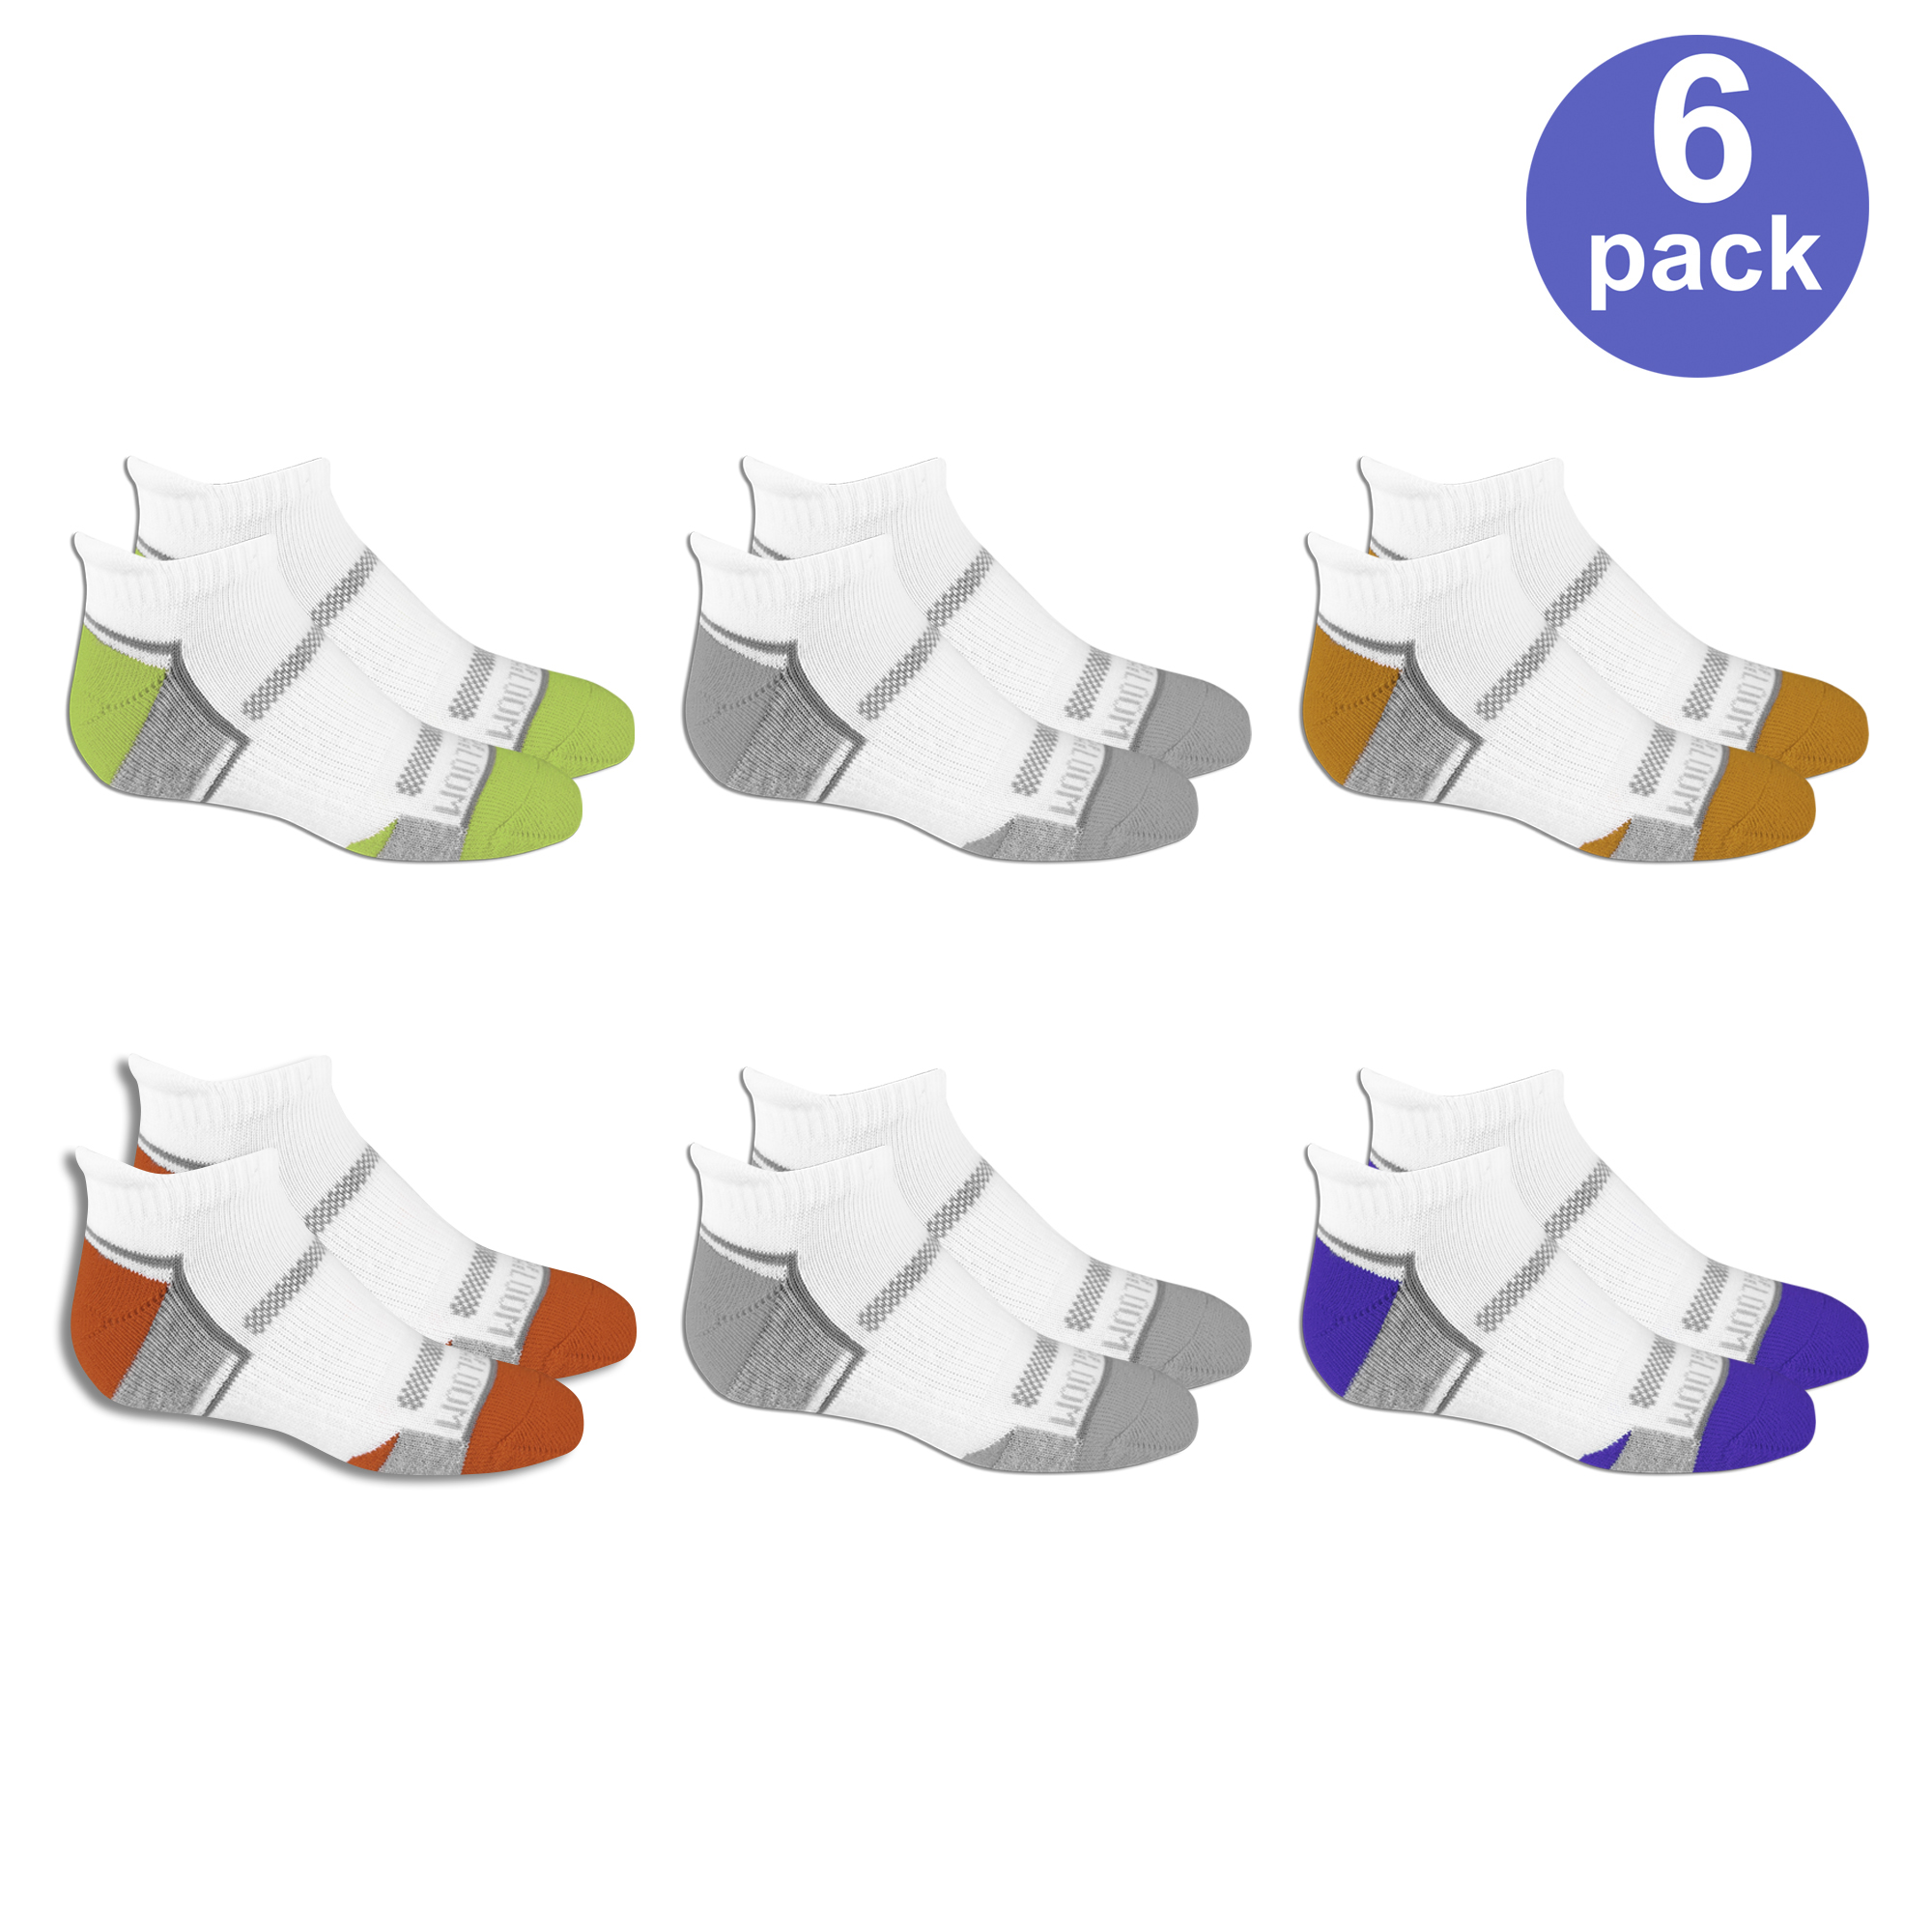 Fruit of the Loom Boys Socks, 6 Pack Low Cut Active Everyday Cushioned (Little Boys & Big Boys) - image 1 of 3